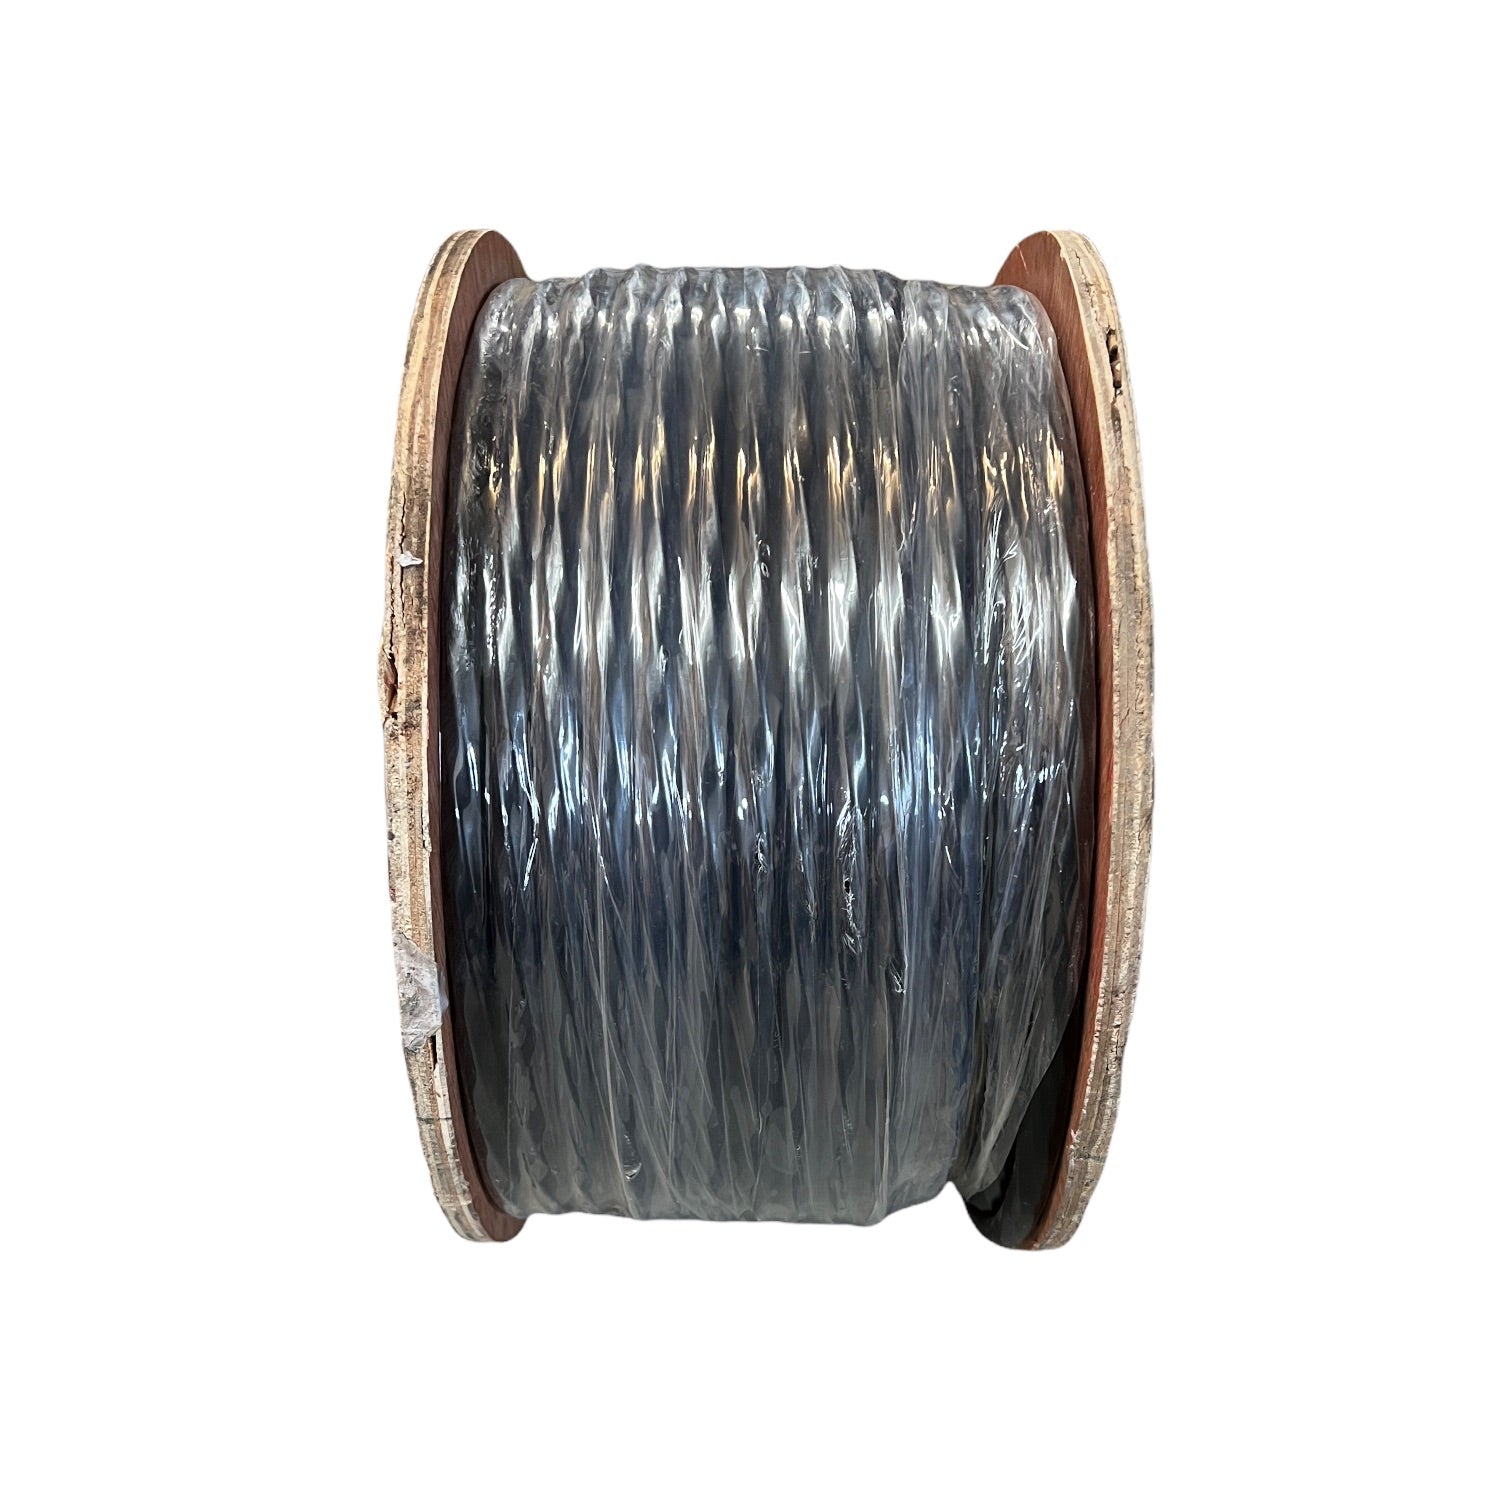 18/13X250 - Multi-Conductor Irrigation Control Wire, 18 awg, 18/13 X 250 ft